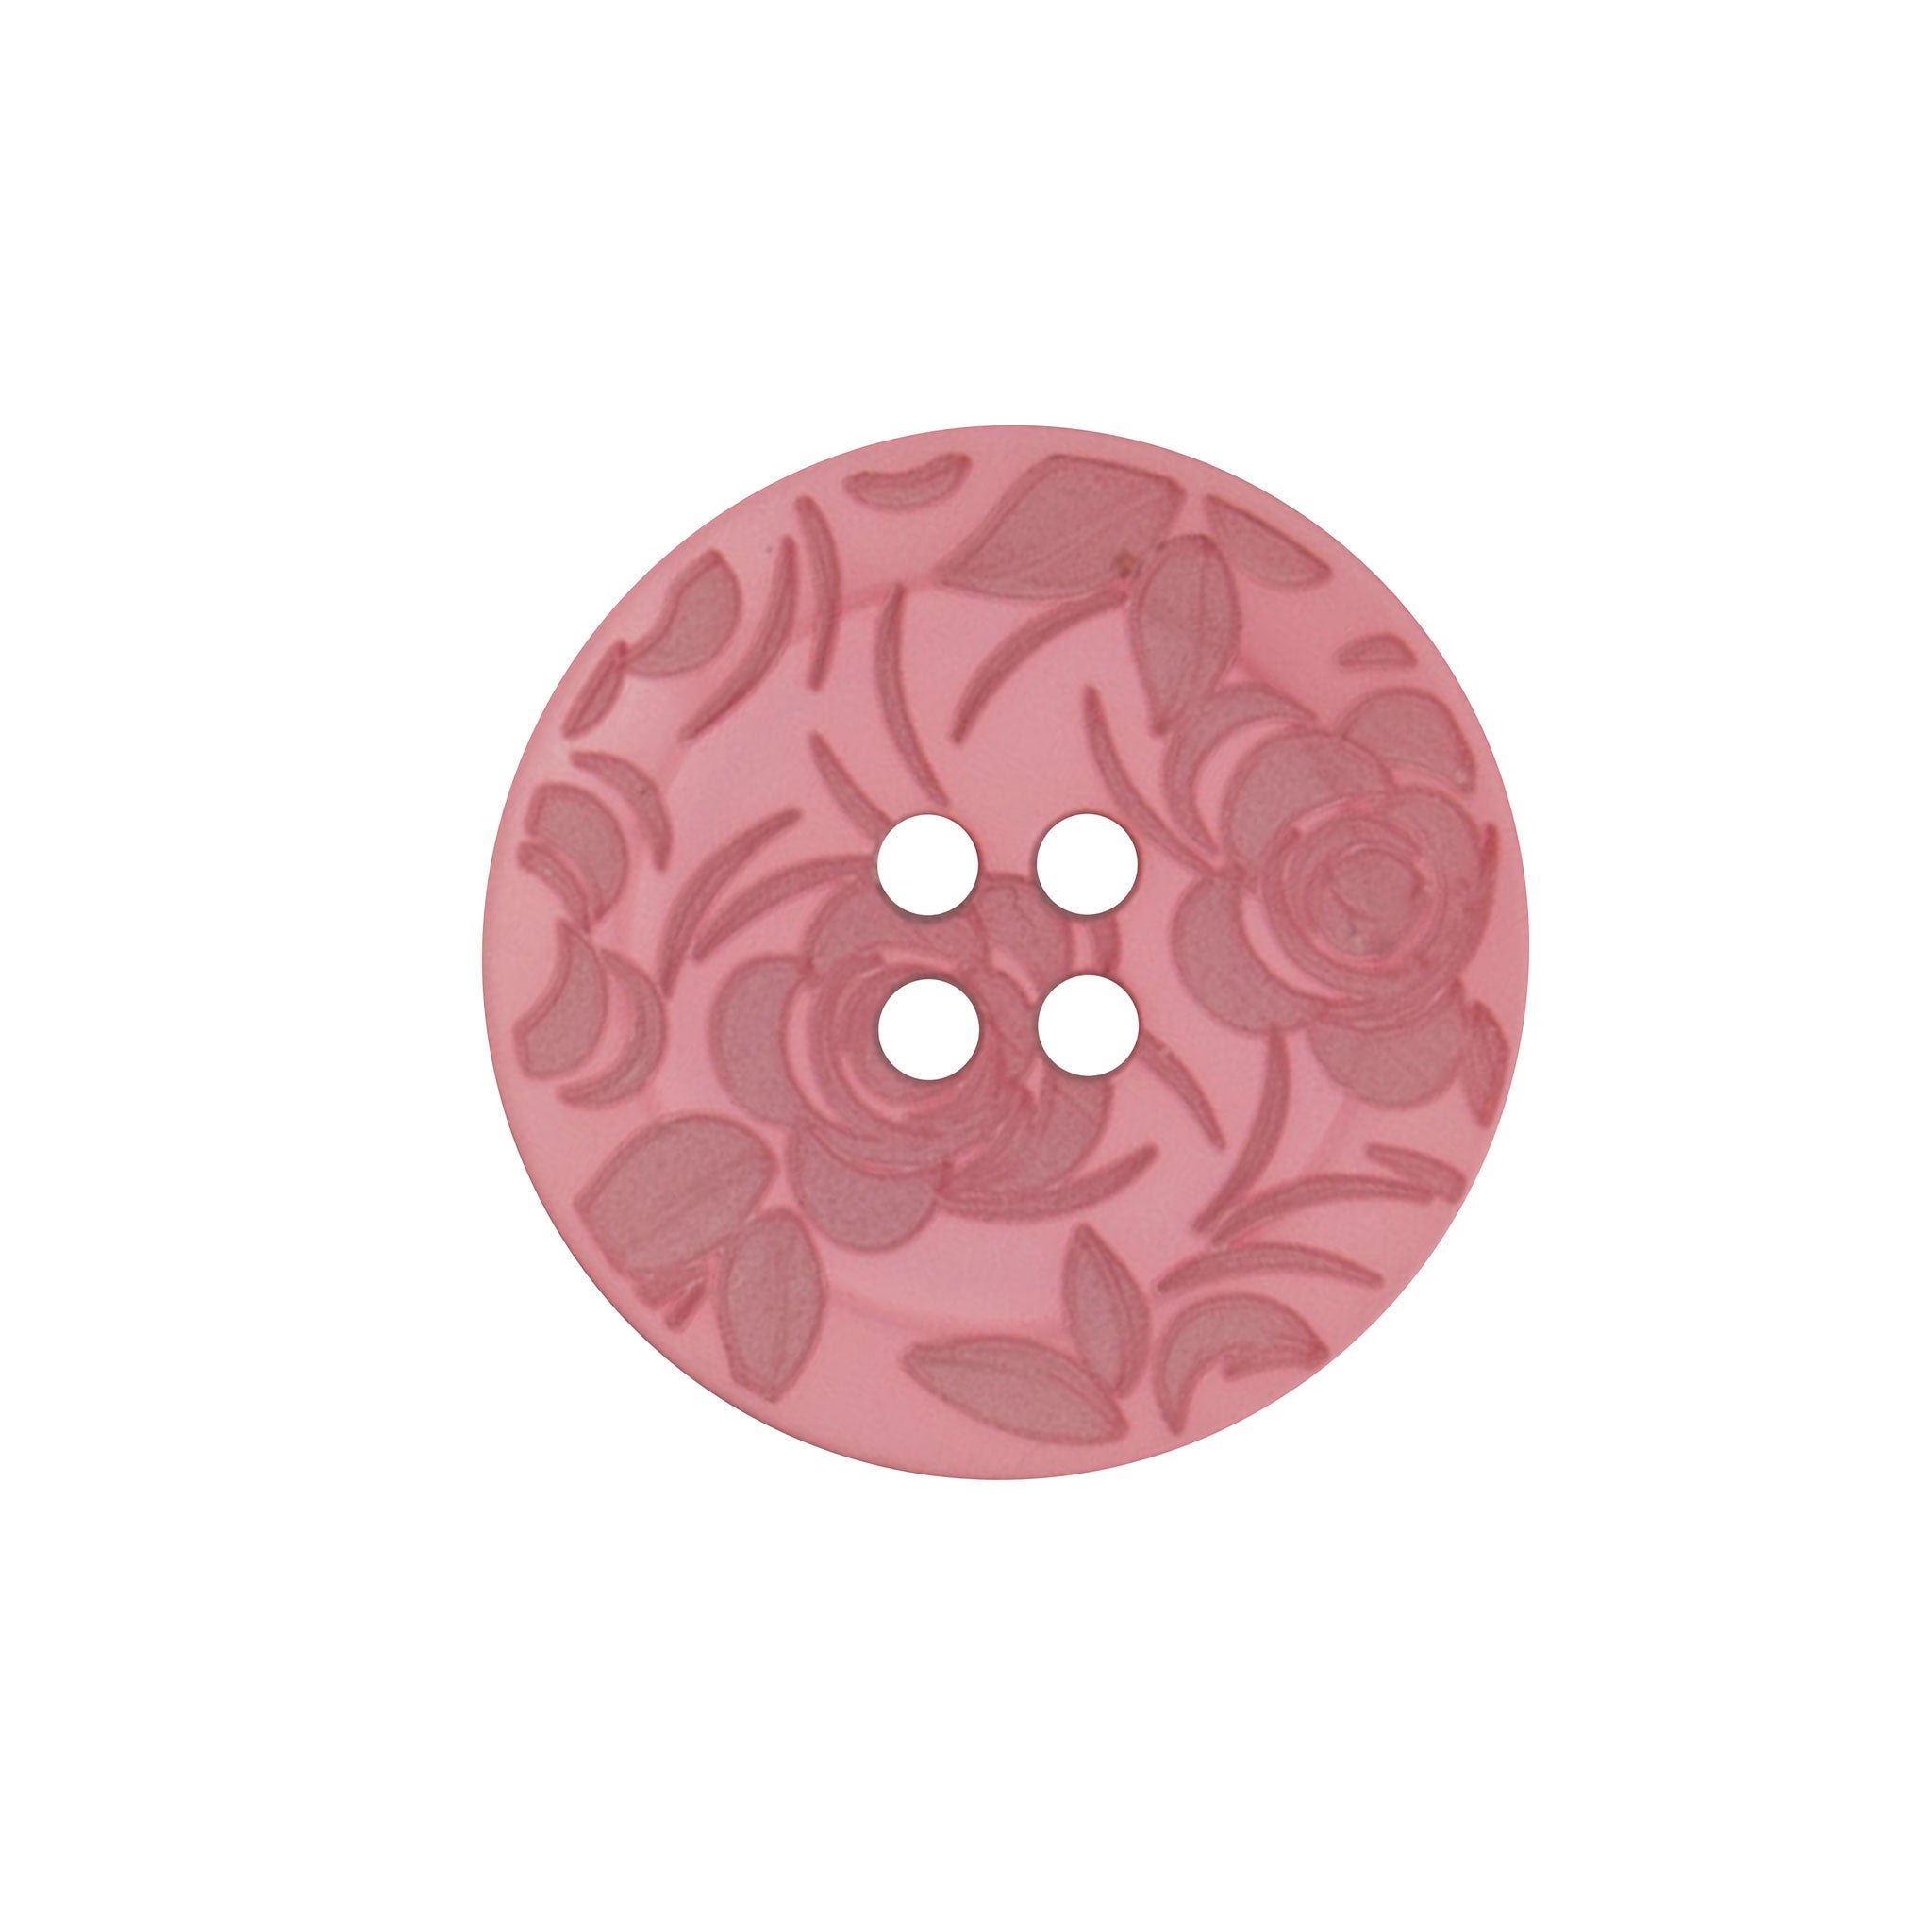 Vogue Star Buttons - Pink Floral - 22mm - Pack of 2 - VS1350